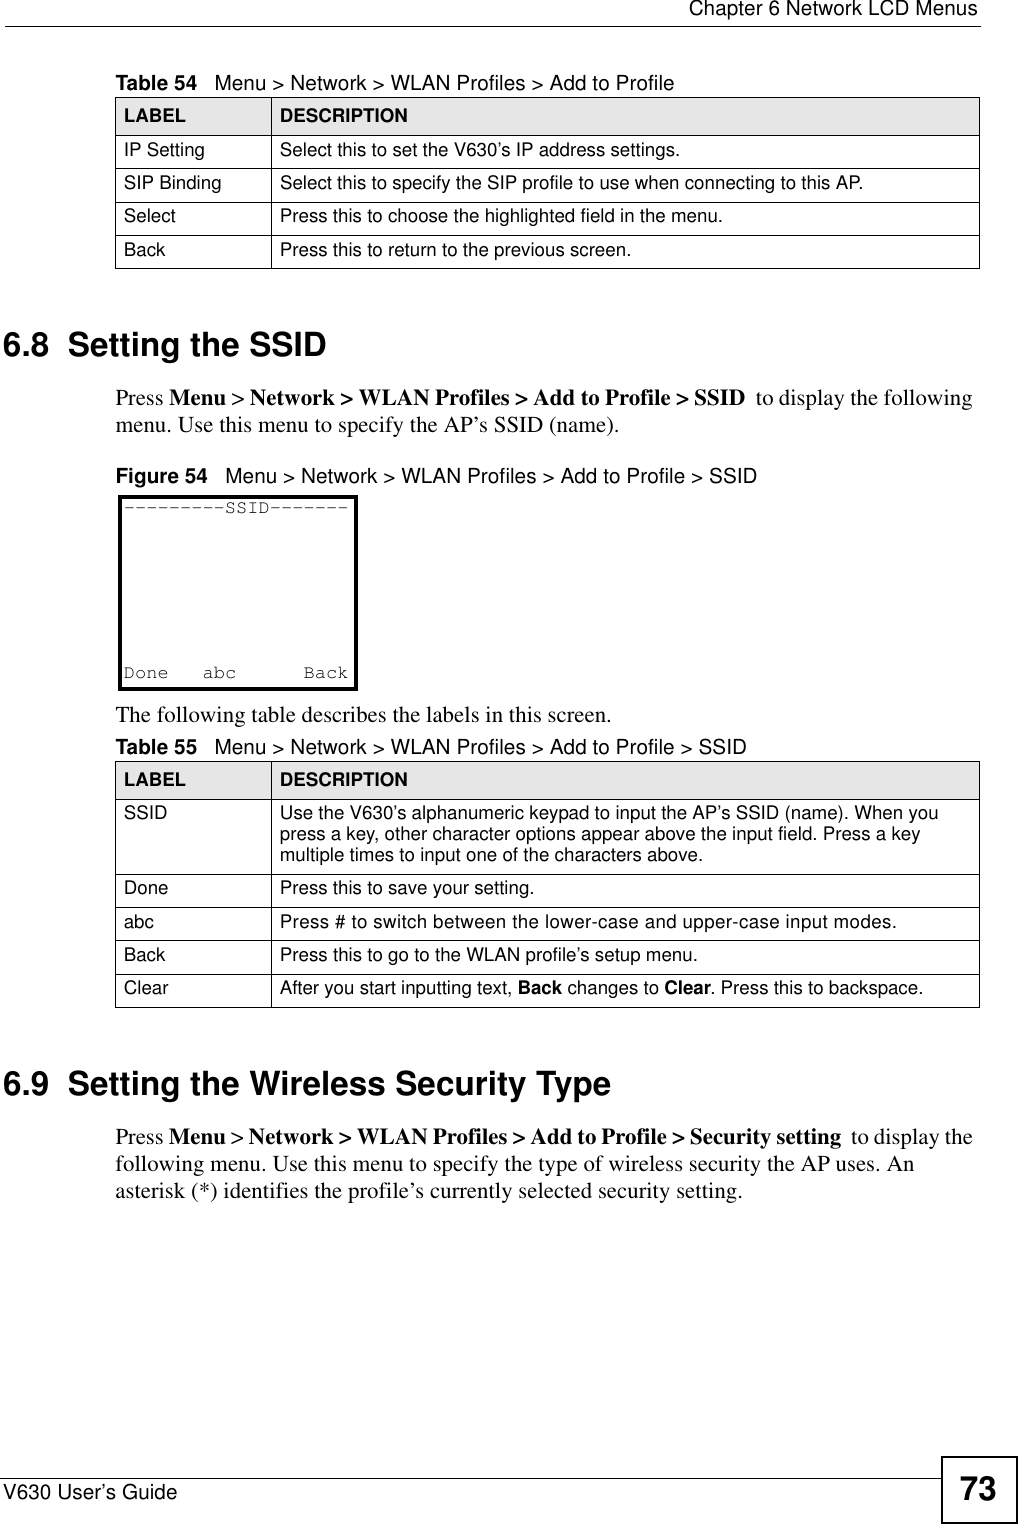  Chapter 6 Network LCD MenusV630 User’s Guide 736.8  Setting the SSIDPress Menu &gt; Network &gt; WLAN Profiles &gt; Add to Profile &gt; SSID  to display the following menu. Use this menu to specify the AP’s SSID (name).Figure 54   Menu &gt; Network &gt; WLAN Profiles &gt; Add to Profile &gt; SSIDThe following table describes the labels in this screen.6.9  Setting the Wireless Security TypePress Menu &gt; Network &gt; WLAN Profiles &gt; Add to Profile &gt; Security setting  to display the following menu. Use this menu to specify the type of wireless security the AP uses. An asterisk (*) identifies the profile’s currently selected security setting.IP Setting Select this to set the V630’s IP address settings.SIP Binding Select this to specify the SIP profile to use when connecting to this AP.Select Press this to choose the highlighted field in the menu.Back Press this to return to the previous screen.Table 54   Menu &gt; Network &gt; WLAN Profiles &gt; Add to ProfileLABEL DESCRIPTIONTable 55   Menu &gt; Network &gt; WLAN Profiles &gt; Add to Profile &gt; SSIDLABEL DESCRIPTIONSSID Use the V630’s alphanumeric keypad to input the AP’s SSID (name). When you press a key, other character options appear above the input field. Press a key multiple times to input one of the characters above.Done Press this to save your setting. abc Press # to switch between the lower-case and upper-case input modes. Back Press this to go to the WLAN profile’s setup menu. Clear After you start inputting text, Back changes to Clear. Press this to backspace.---------SSID-------Done abc   Back